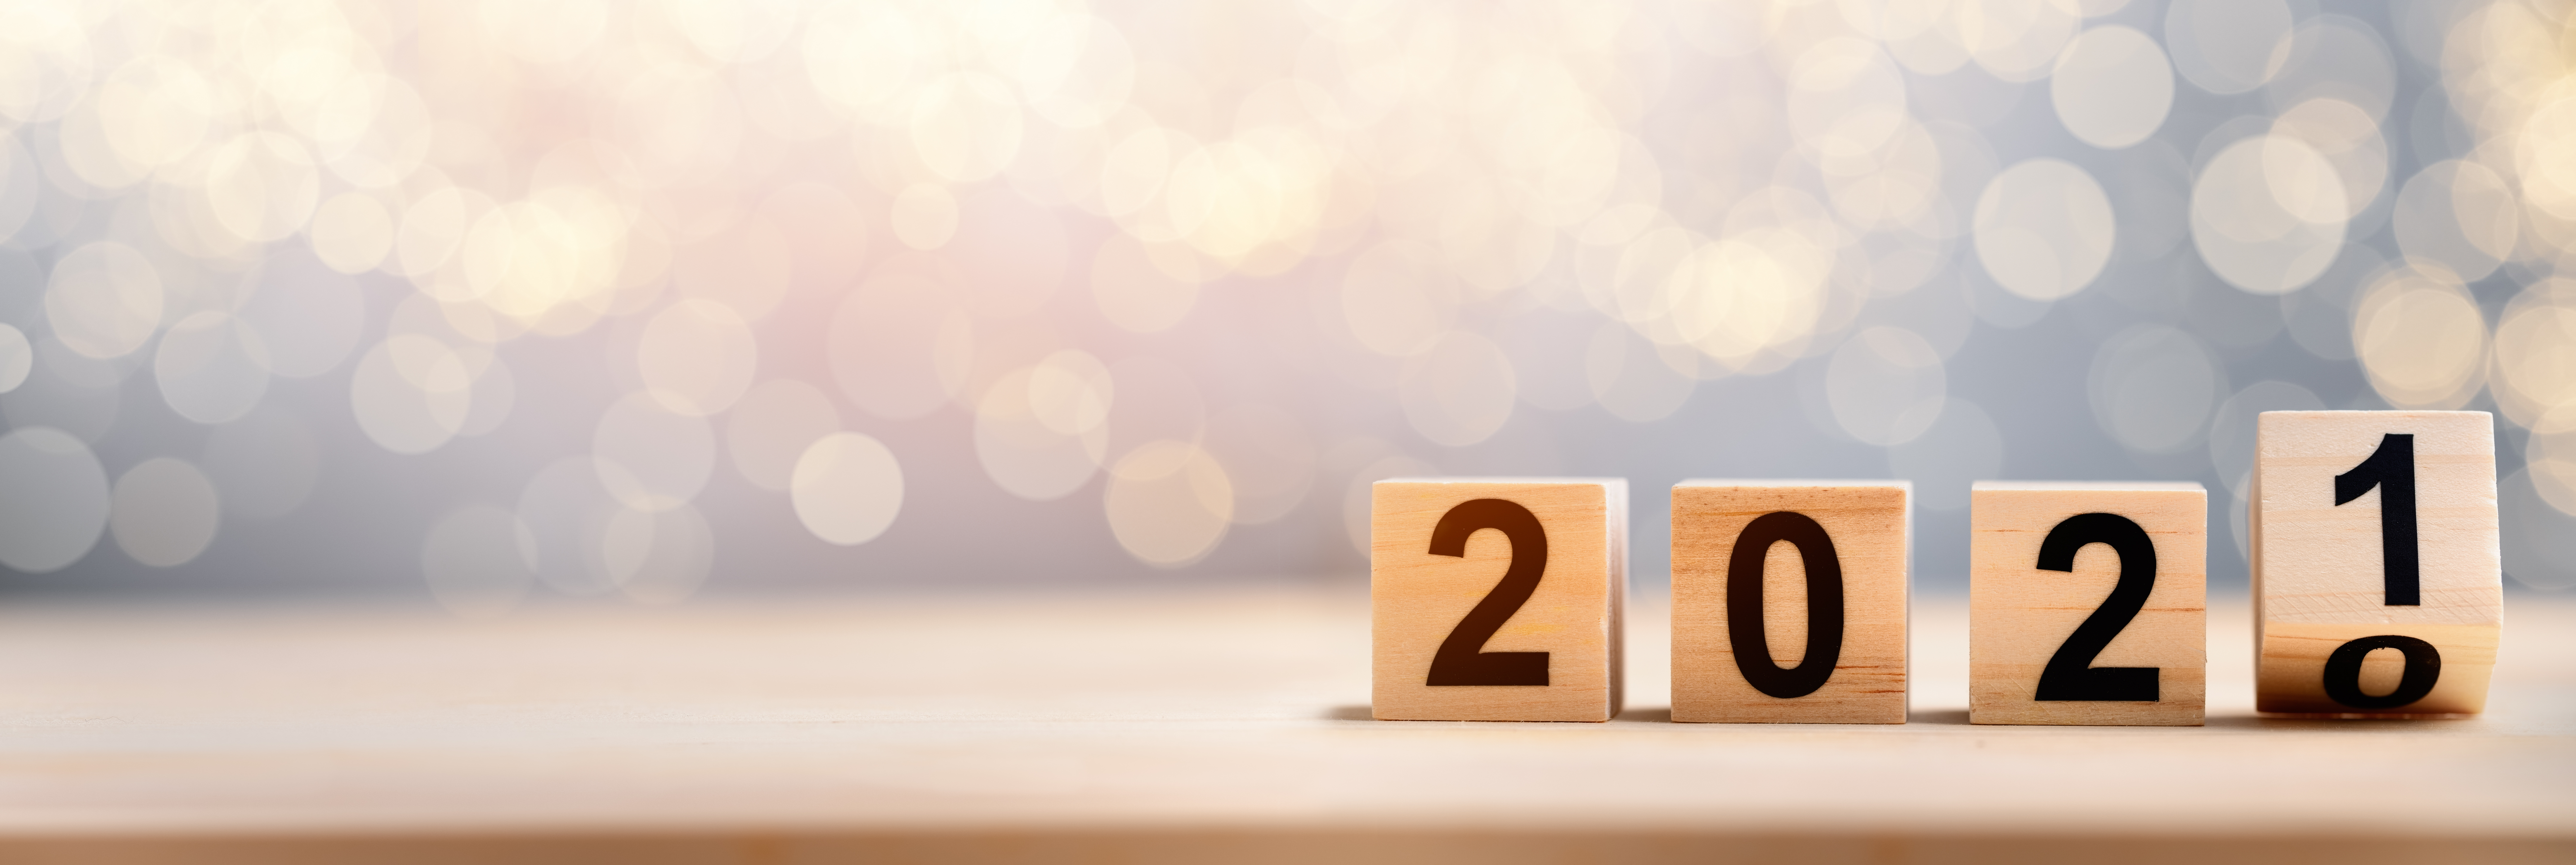 Image of four wooden blocks with numbers on them that align to read "2020." The last block is rotating forward so that the number is changing to "2021."